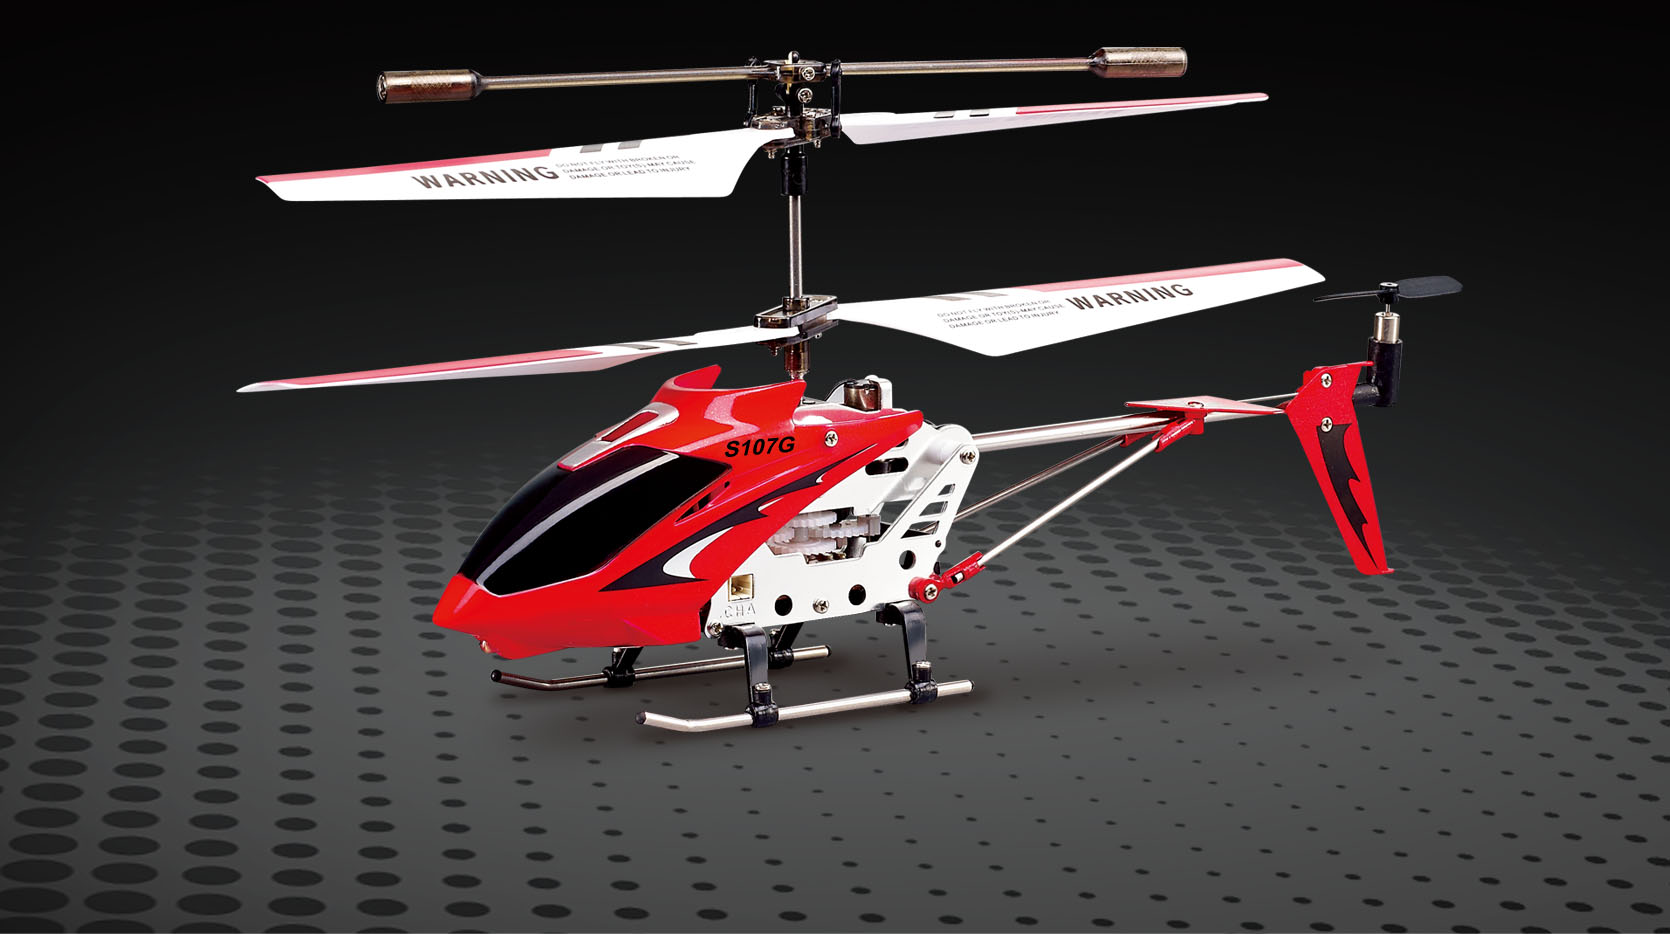 syma 107g helicopter